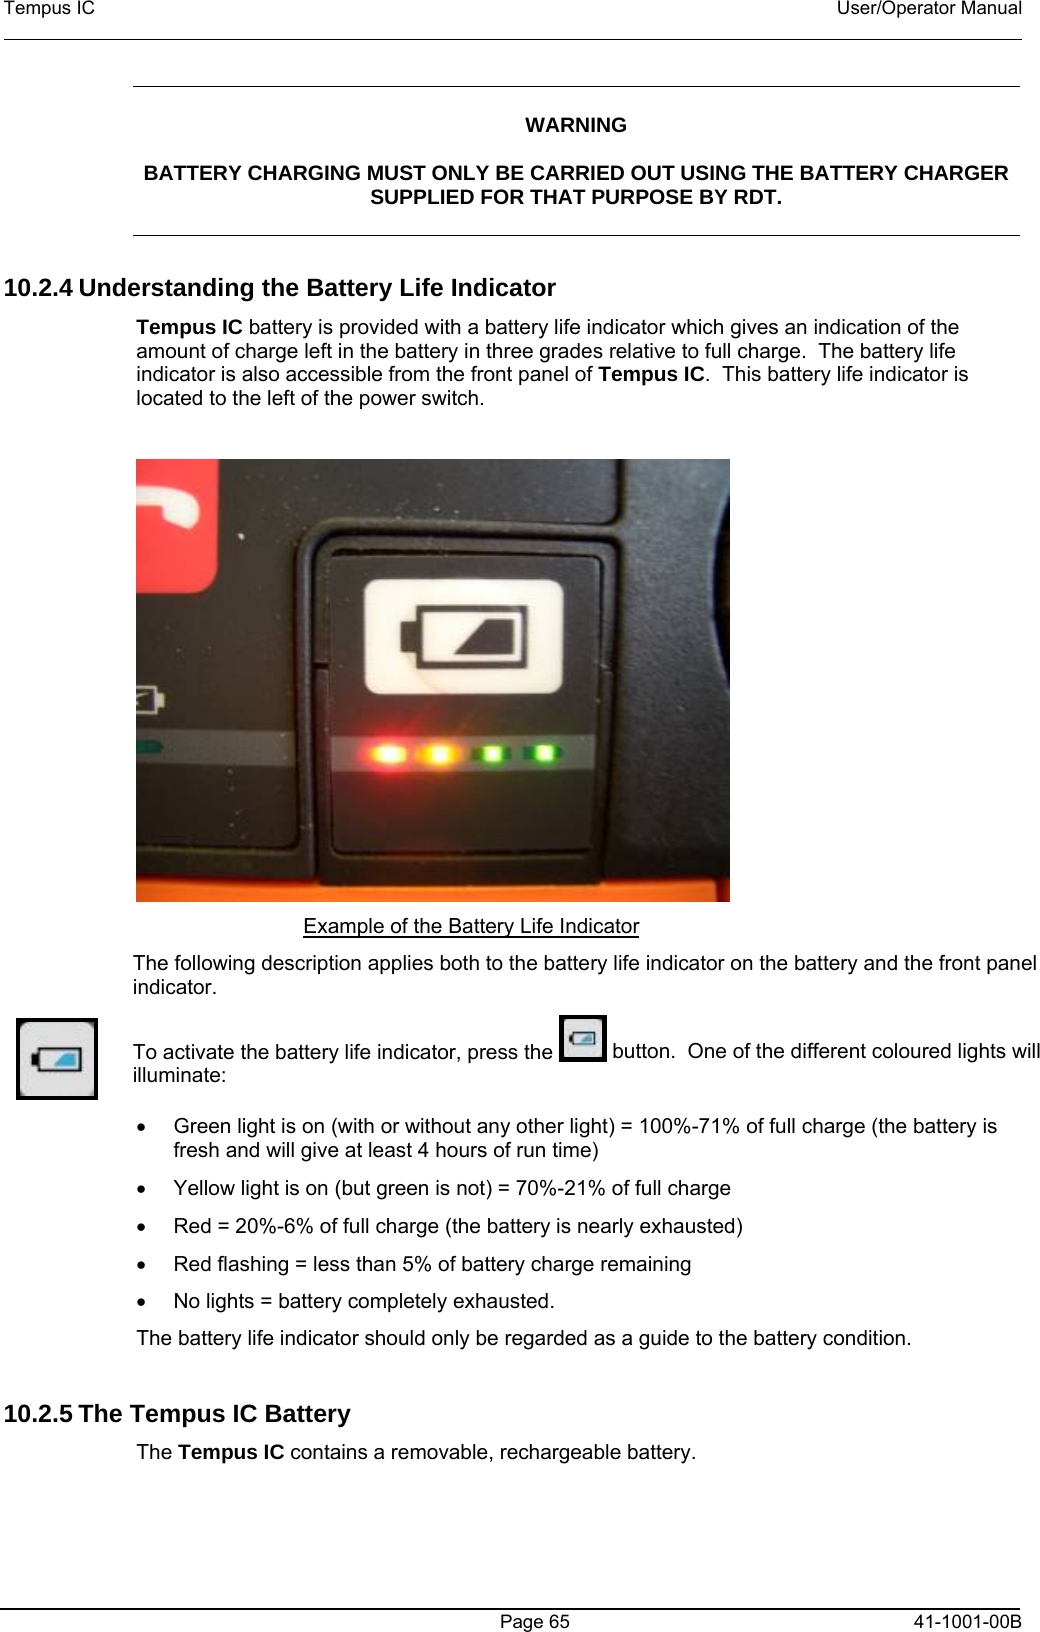 Tempus IC    User/Operator Manual     WARNING  BATTERY CHARGING MUST ONLY BE CARRIED OUT USING THE BATTERY CHARGER SUPPLIED FOR THAT PURPOSE BY RDT.  10.2.4 Understanding the Battery Life Indicator  Tempus IC battery is provided with a battery life indicator which gives an indication of the amount of charge left in the battery in three grades relative to full charge.  The battery life indicator is also accessible from the front panel of Tempus IC.  This battery life indicator is located to the left of the power switch.   Example of the Battery Life Indicator    The following description applies both to the battery life indicator on the battery and the front panel indicator.  To activate the battery life indicator, press the   button.  One of the different coloured lights will illuminate: •  Green light is on (with or without any other light) = 100%-71% of full charge (the battery is fresh and will give at least 4 hours of run time) •  Yellow light is on (but green is not) = 70%-21% of full charge  •  Red = 20%-6% of full charge (the battery is nearly exhausted) •  Red flashing = less than 5% of battery charge remaining •  No lights = battery completely exhausted. The battery life indicator should only be regarded as a guide to the battery condition.    10.2.5 The Tempus IC Battery The Tempus IC contains a removable, rechargeable battery.    Page 65   41-1001-00B 